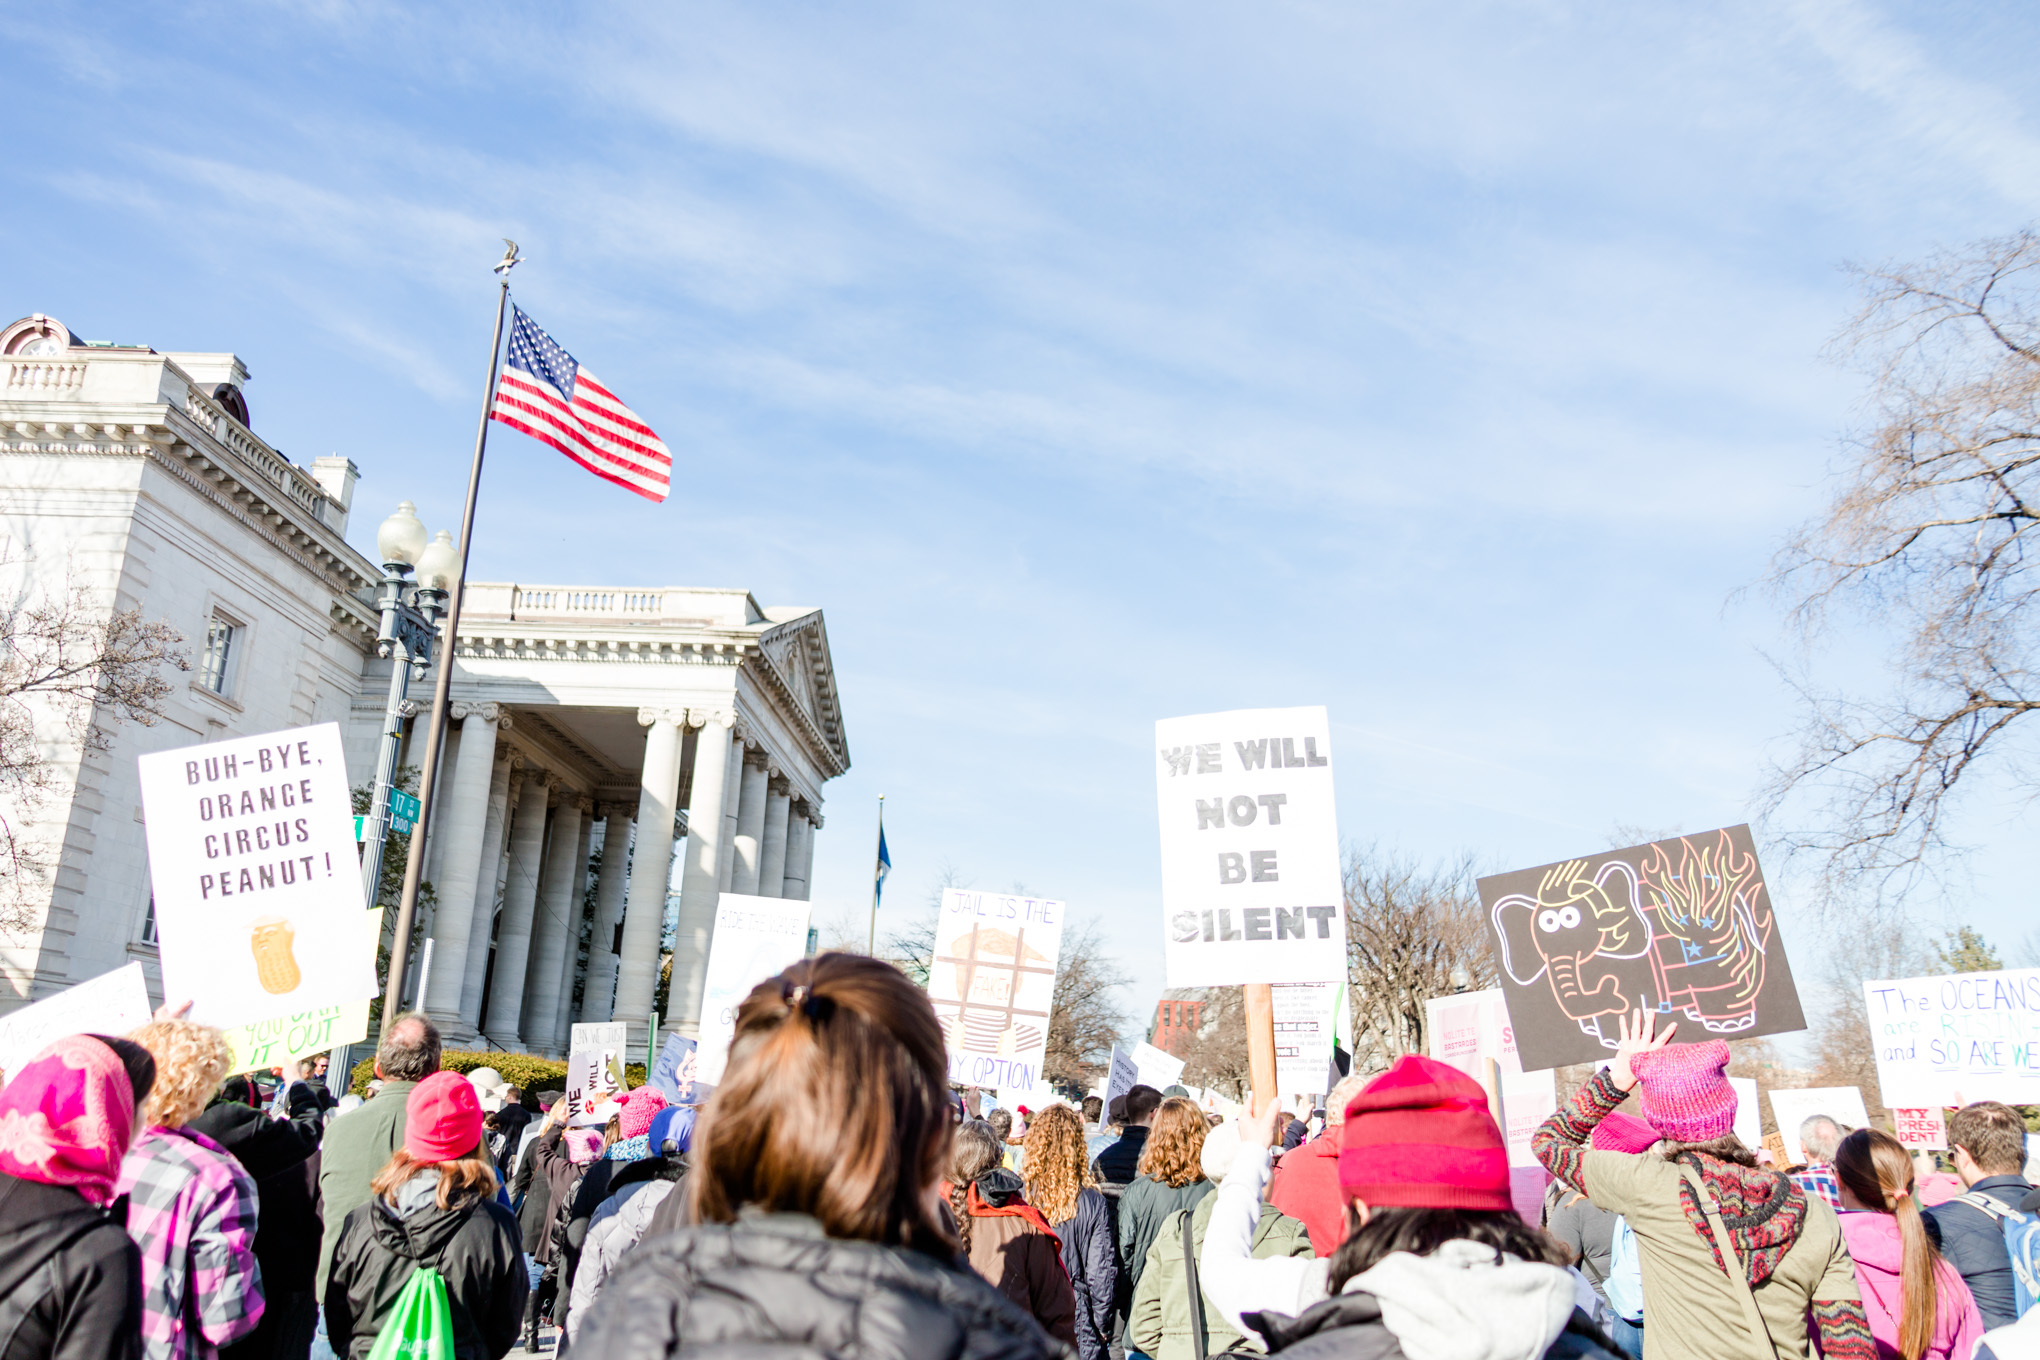 DC Women's March, Women's March, Washington, DC, photo journalism, January 2018, Constitution Hall, protest